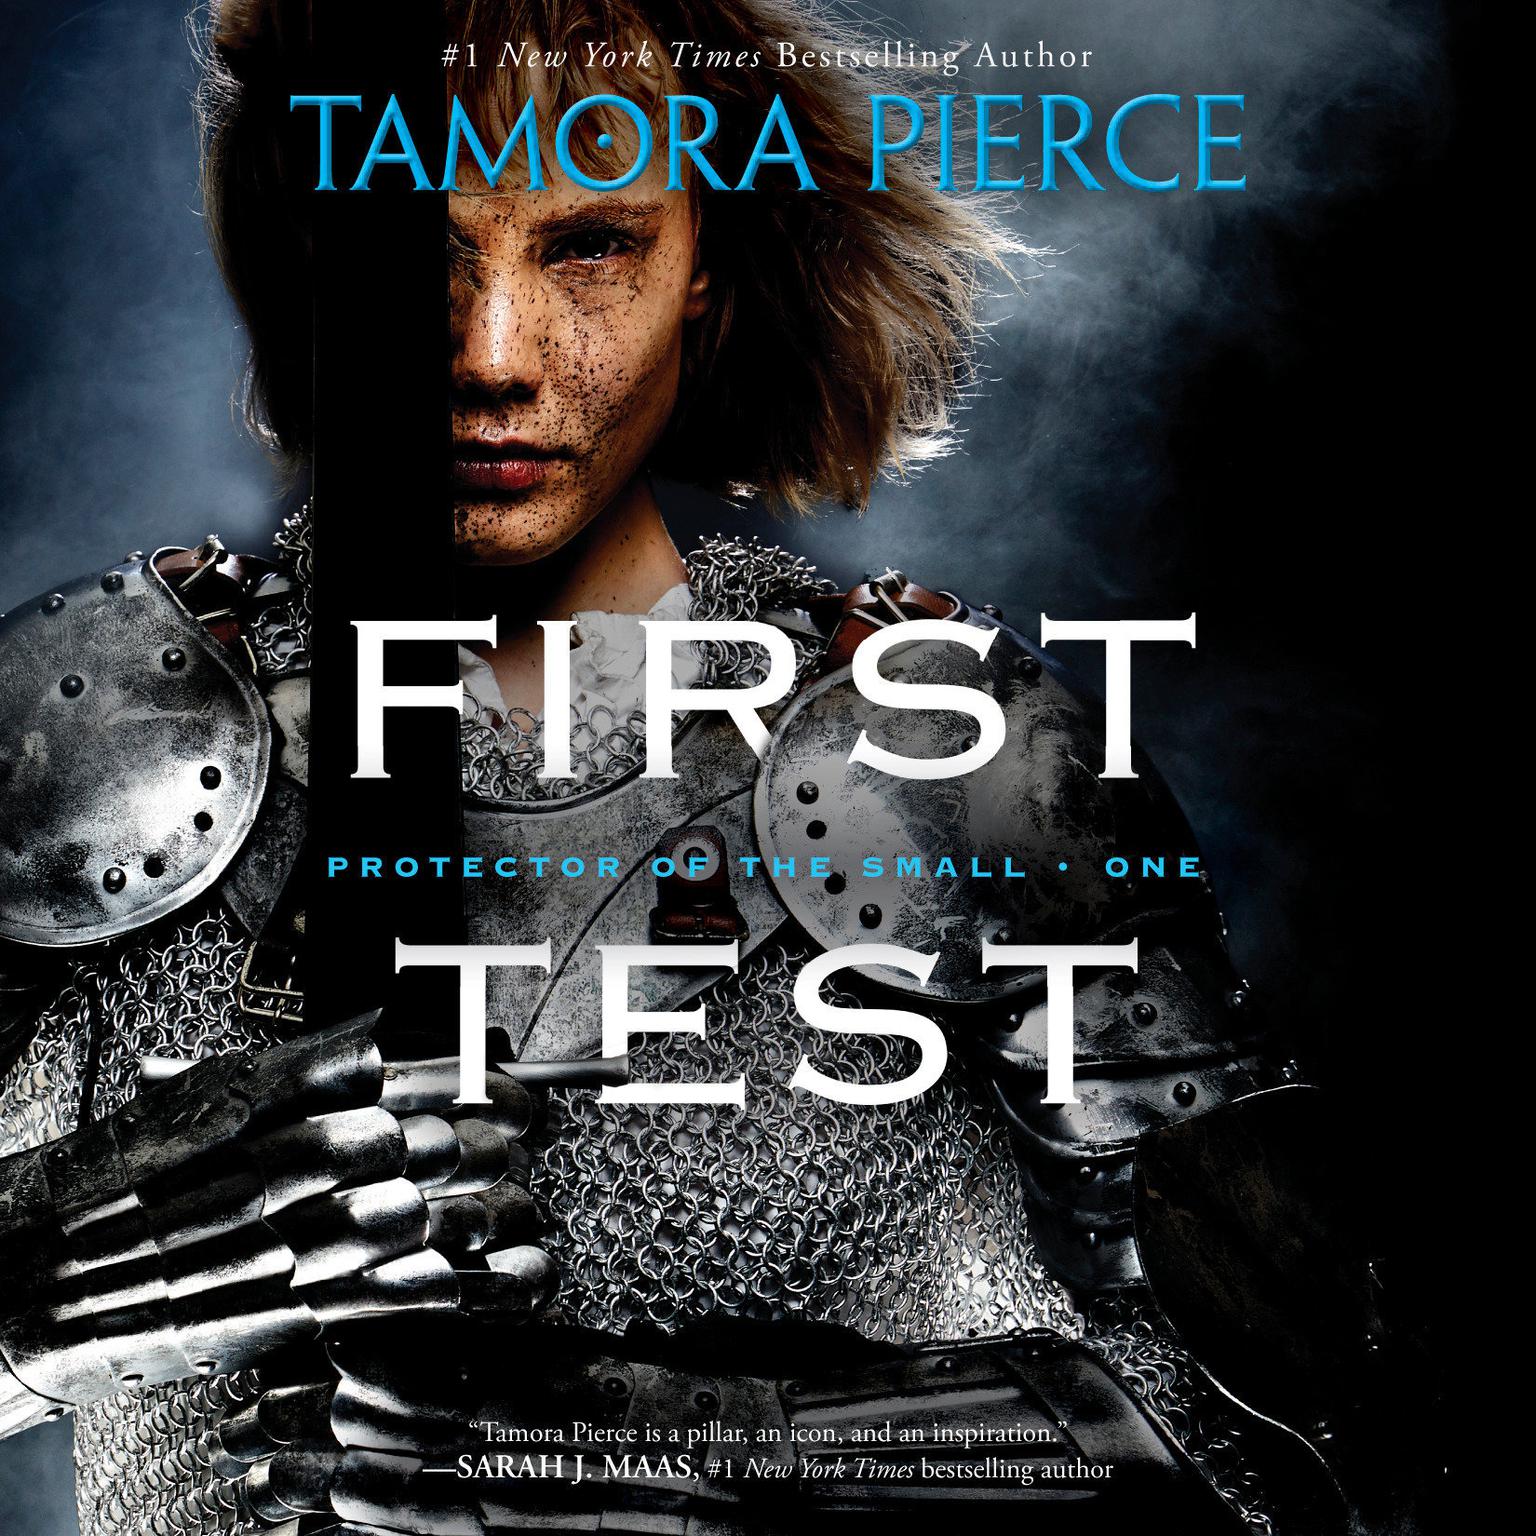 First Test: Book 1 of the Protector of the Small Quartet Audiobook, by Tamora Pierce